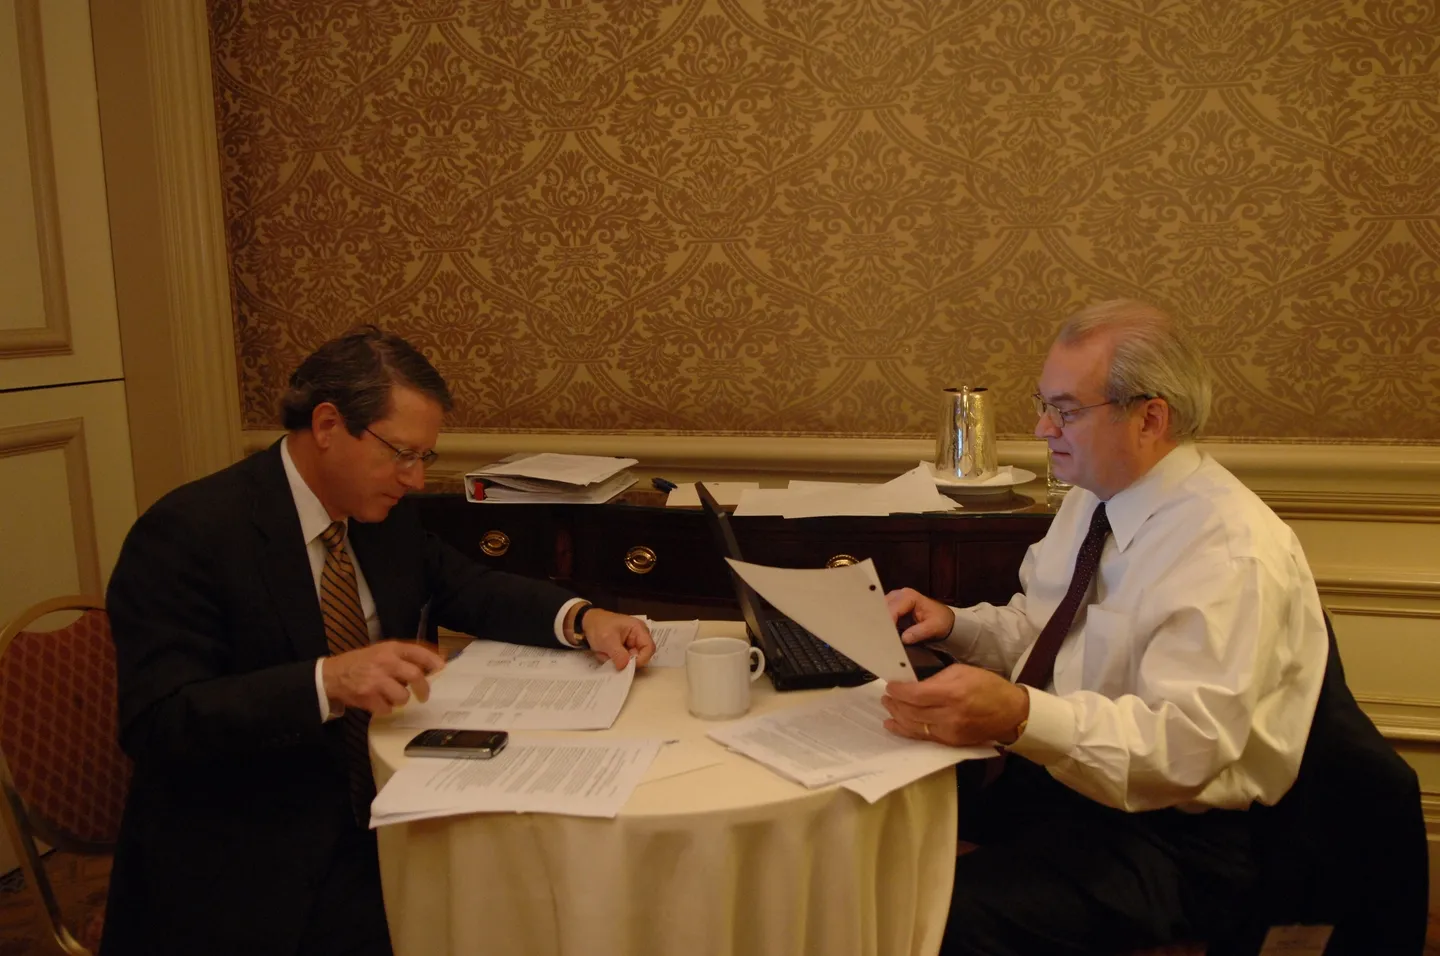 My colleague, attorney Jim Sivon of Sivon, Natter, and Wechsler, PC, and I, putting the finishing touches on our report on financial market competitiveness to the Financial Services Roundtable (2007)